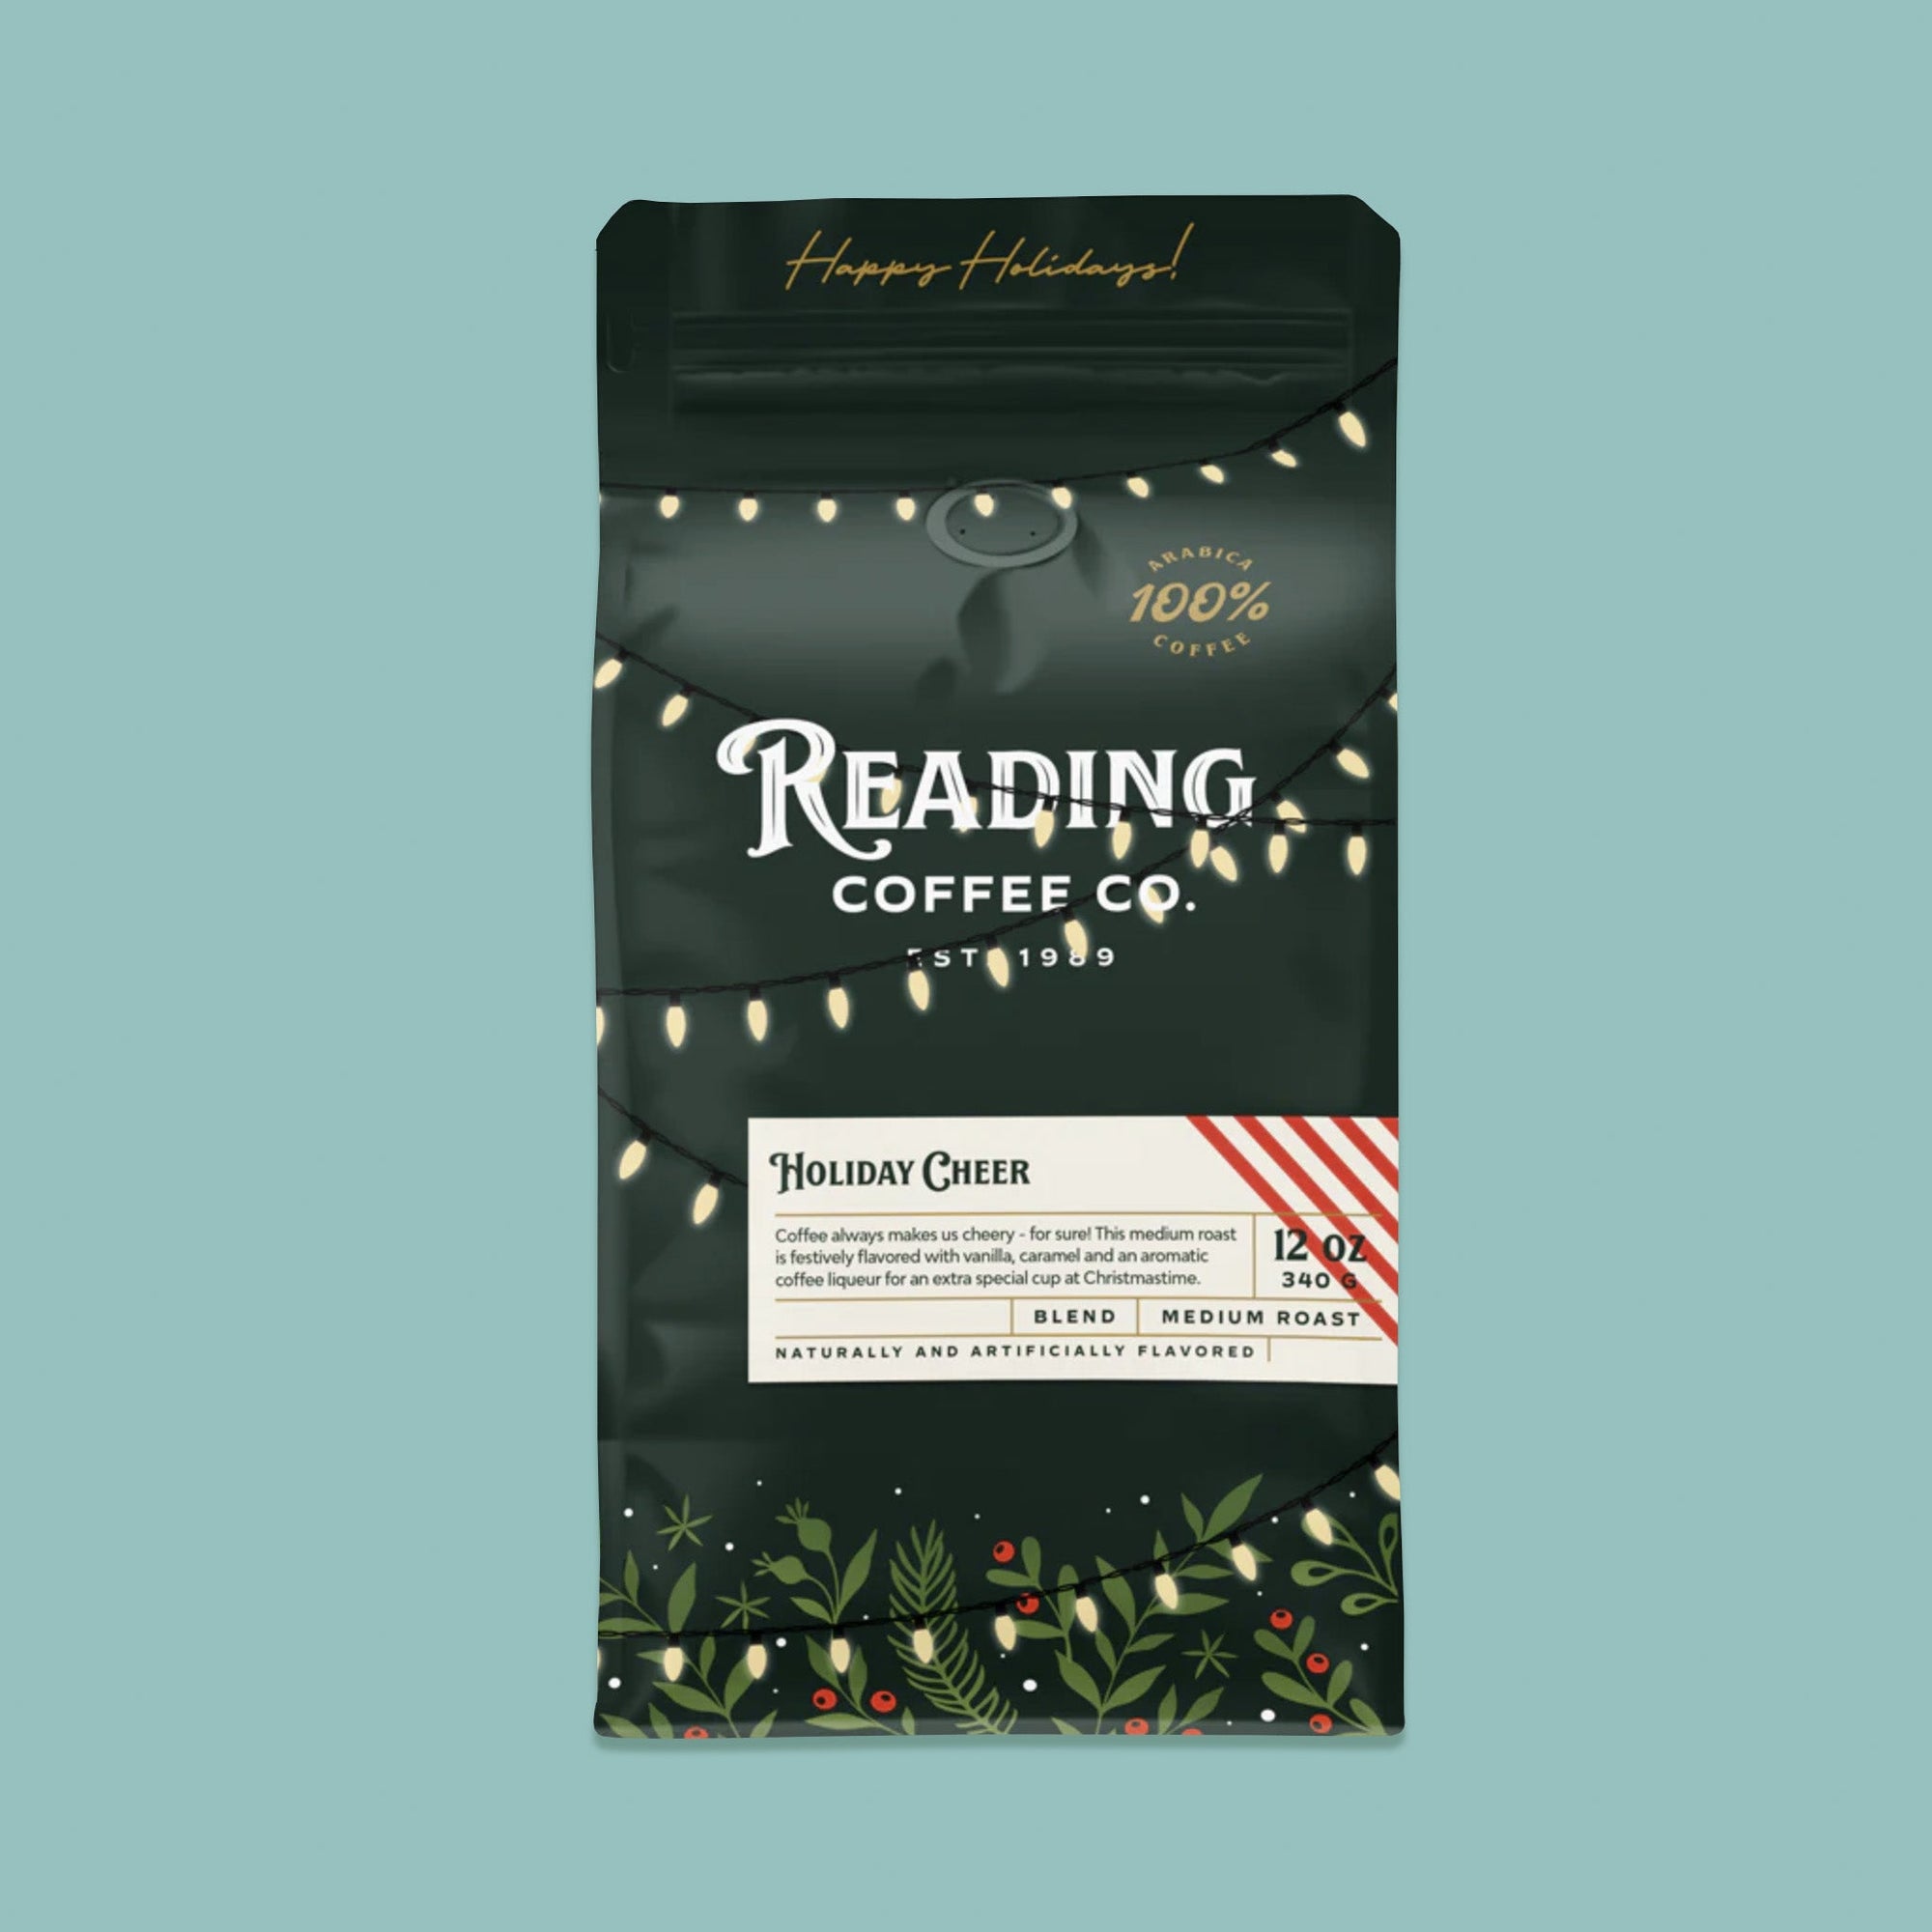 On a sage green background sits a dark green package of coffee. This package is gold, white, and dark green lettering. There are swags of lights and greenery with berries. It says "Happy Holidays!", "Reading Coffee Co. Est. 1989", "Holiday Cheer Blend Medium Roast." It is '100% Arabica Coffee. It also says "Coffee always makes us cheery - for sure! This medium roast is festively flavored with vanilla, caramel and an aromatic coffee liquer for an extra special cup at Christmastime." 12 oz 340g